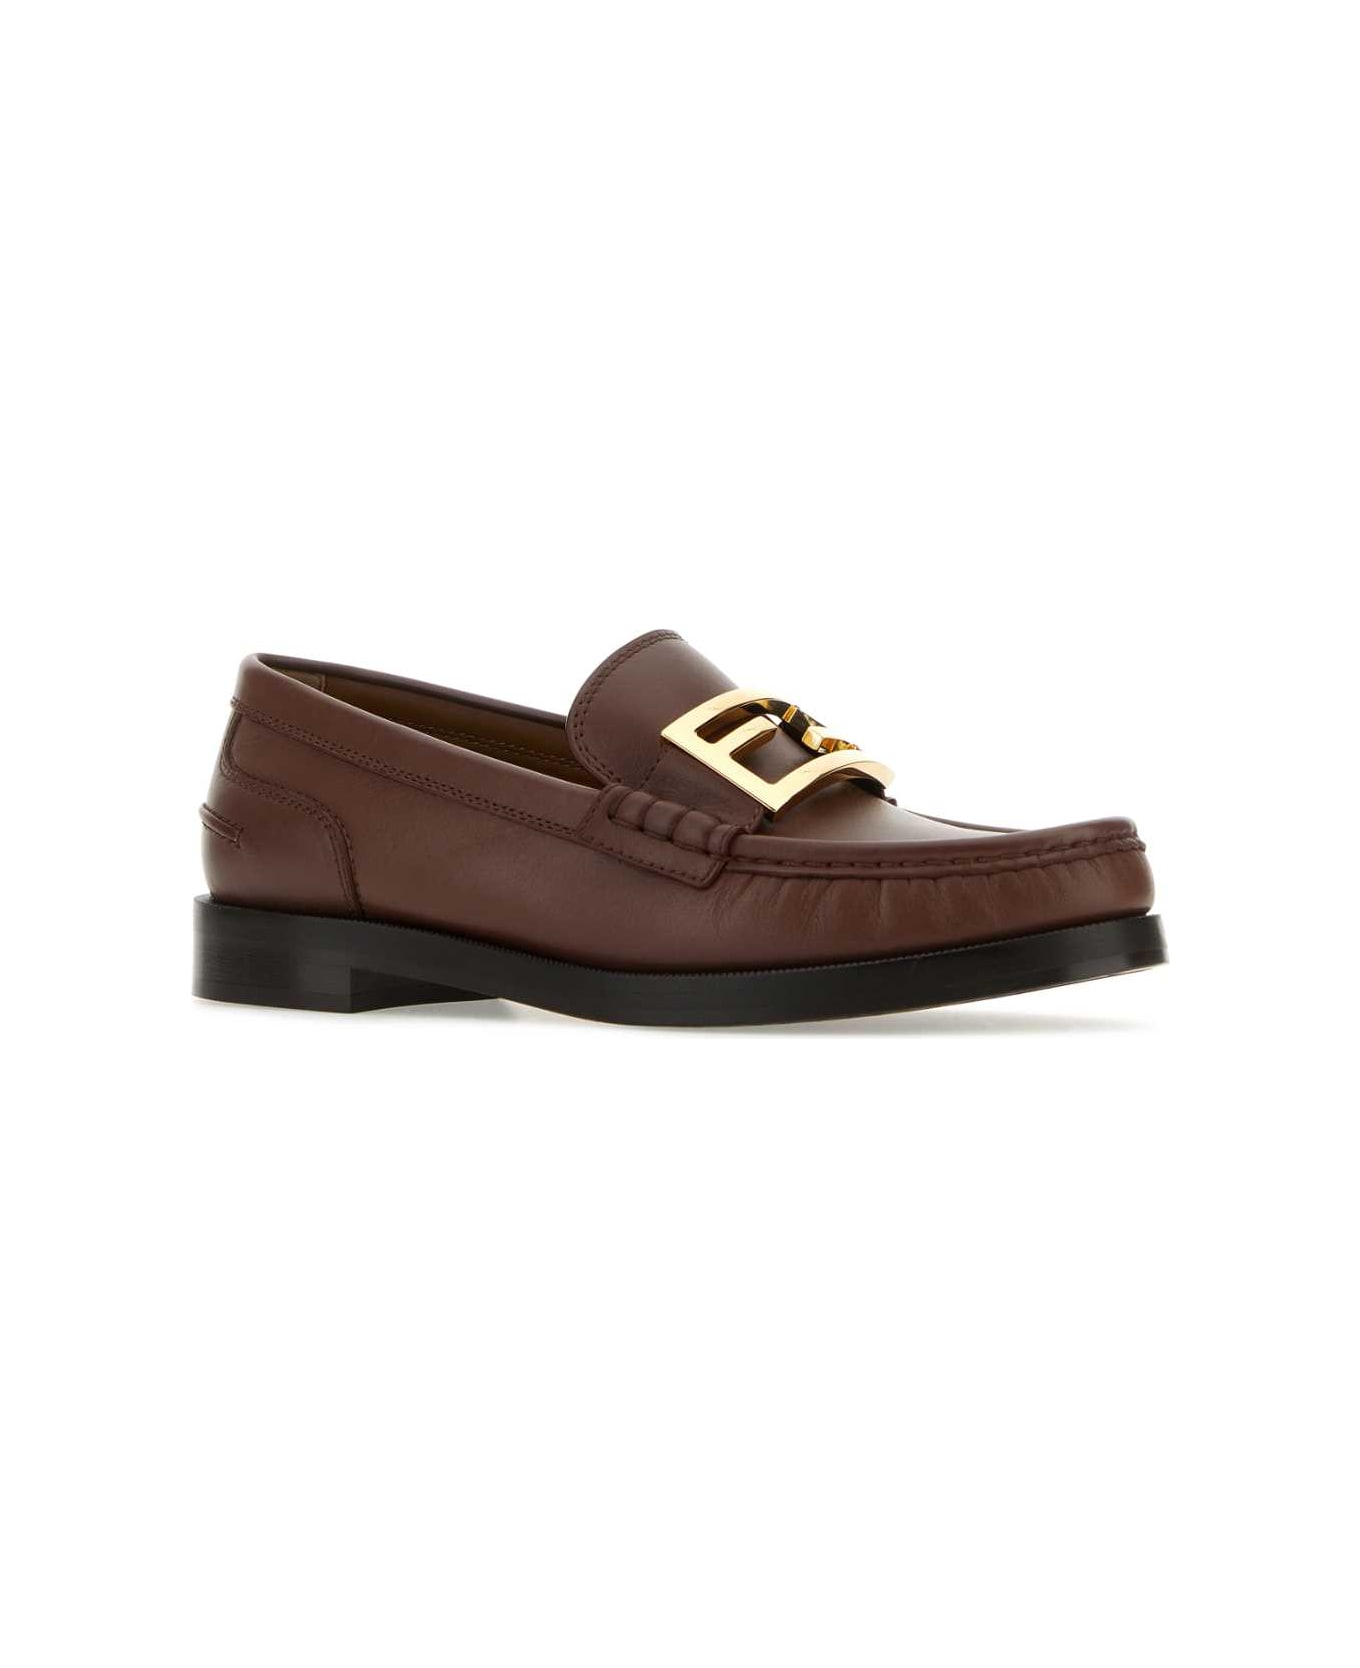 Fendi Brown Leather Baguette Loafers - ACORN